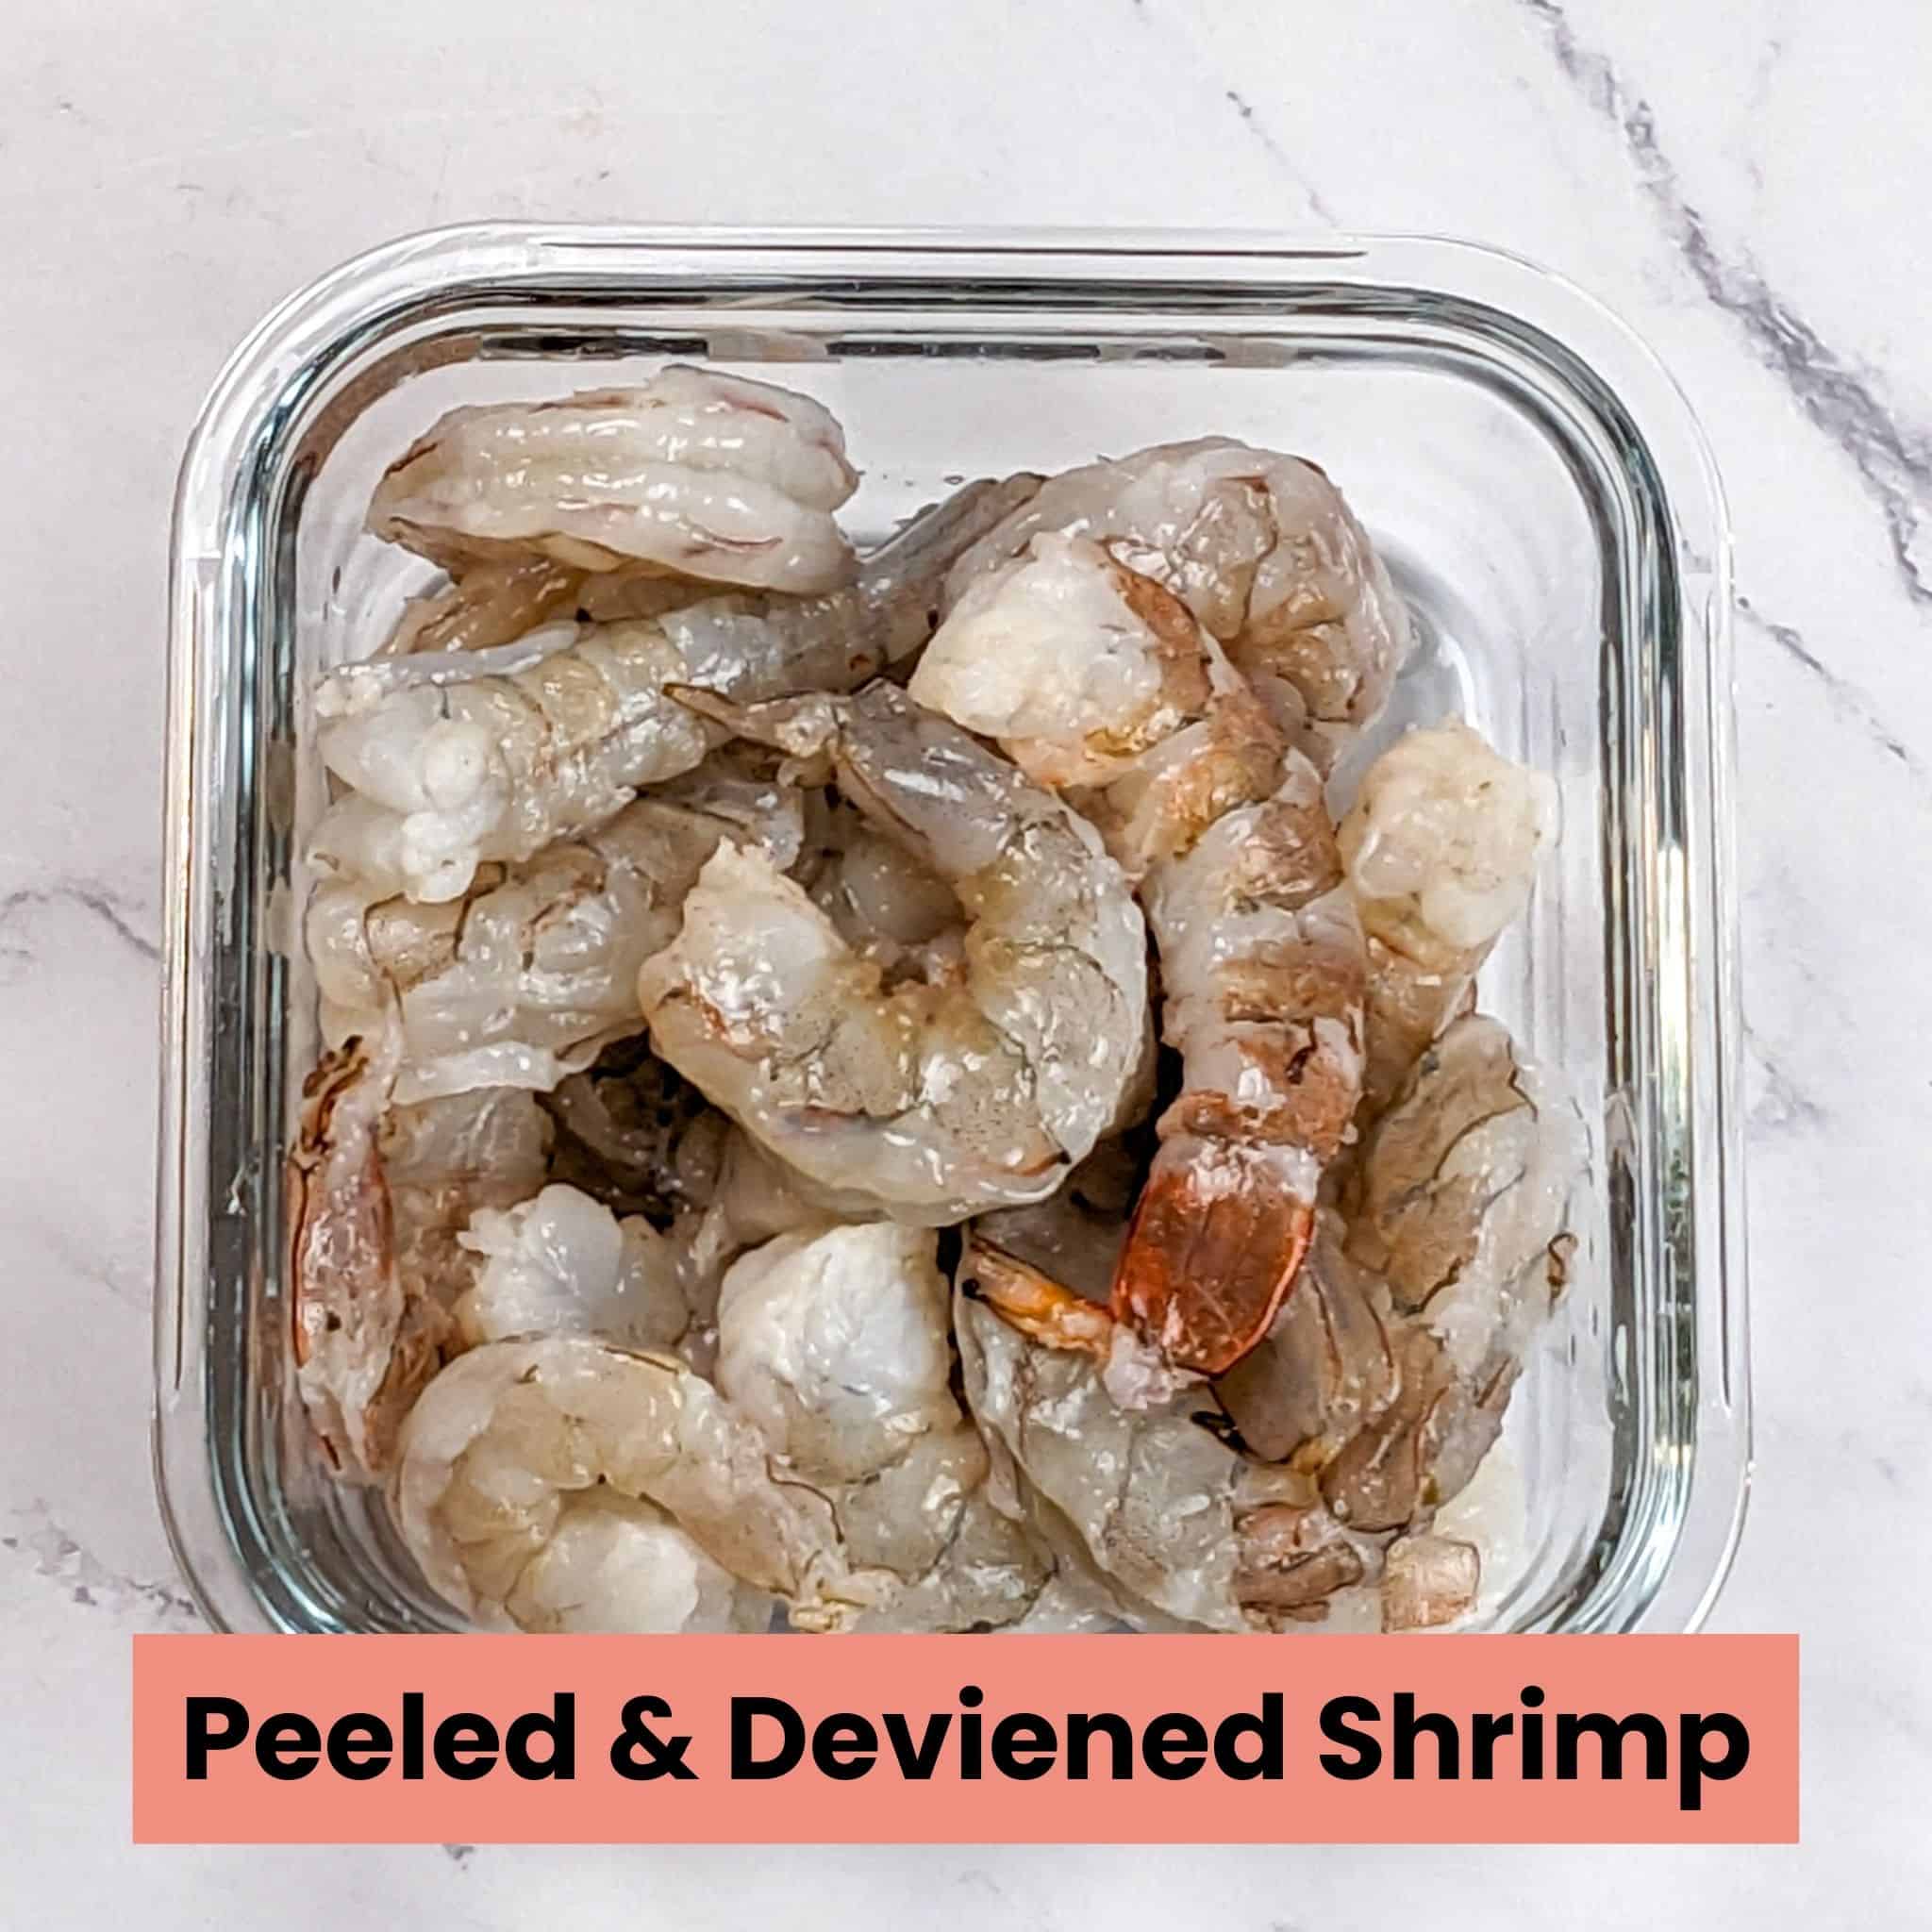 peel and deveined raw shrimp in a square glass container.